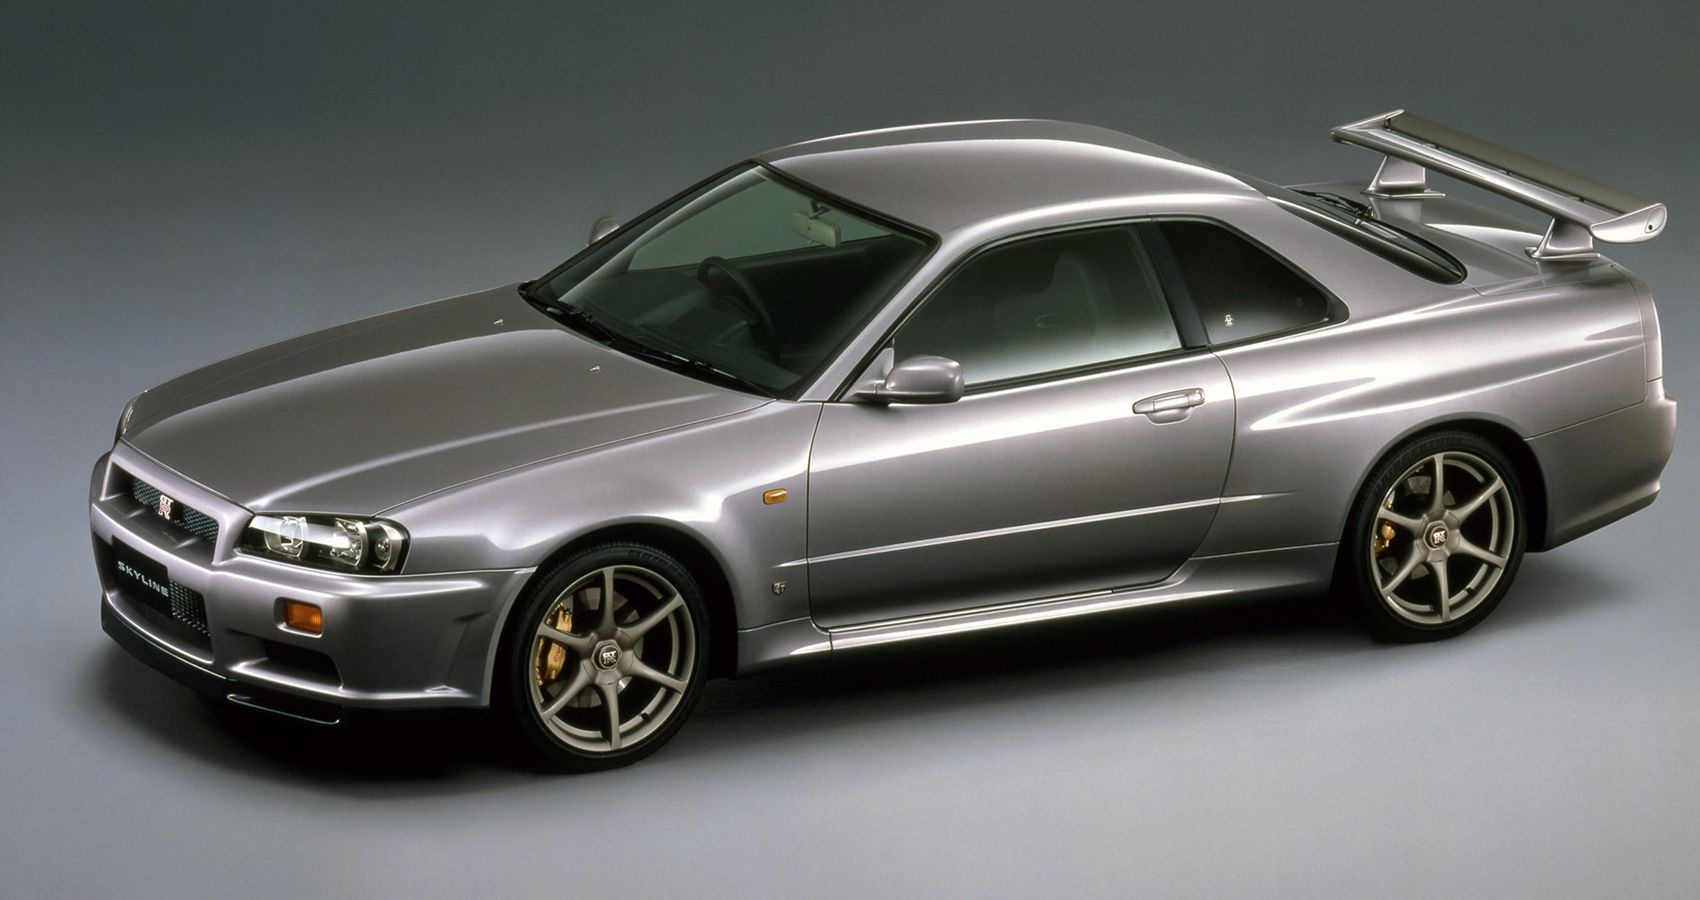 Front 3/4 view of a silver Skyline GTR R34, high angle